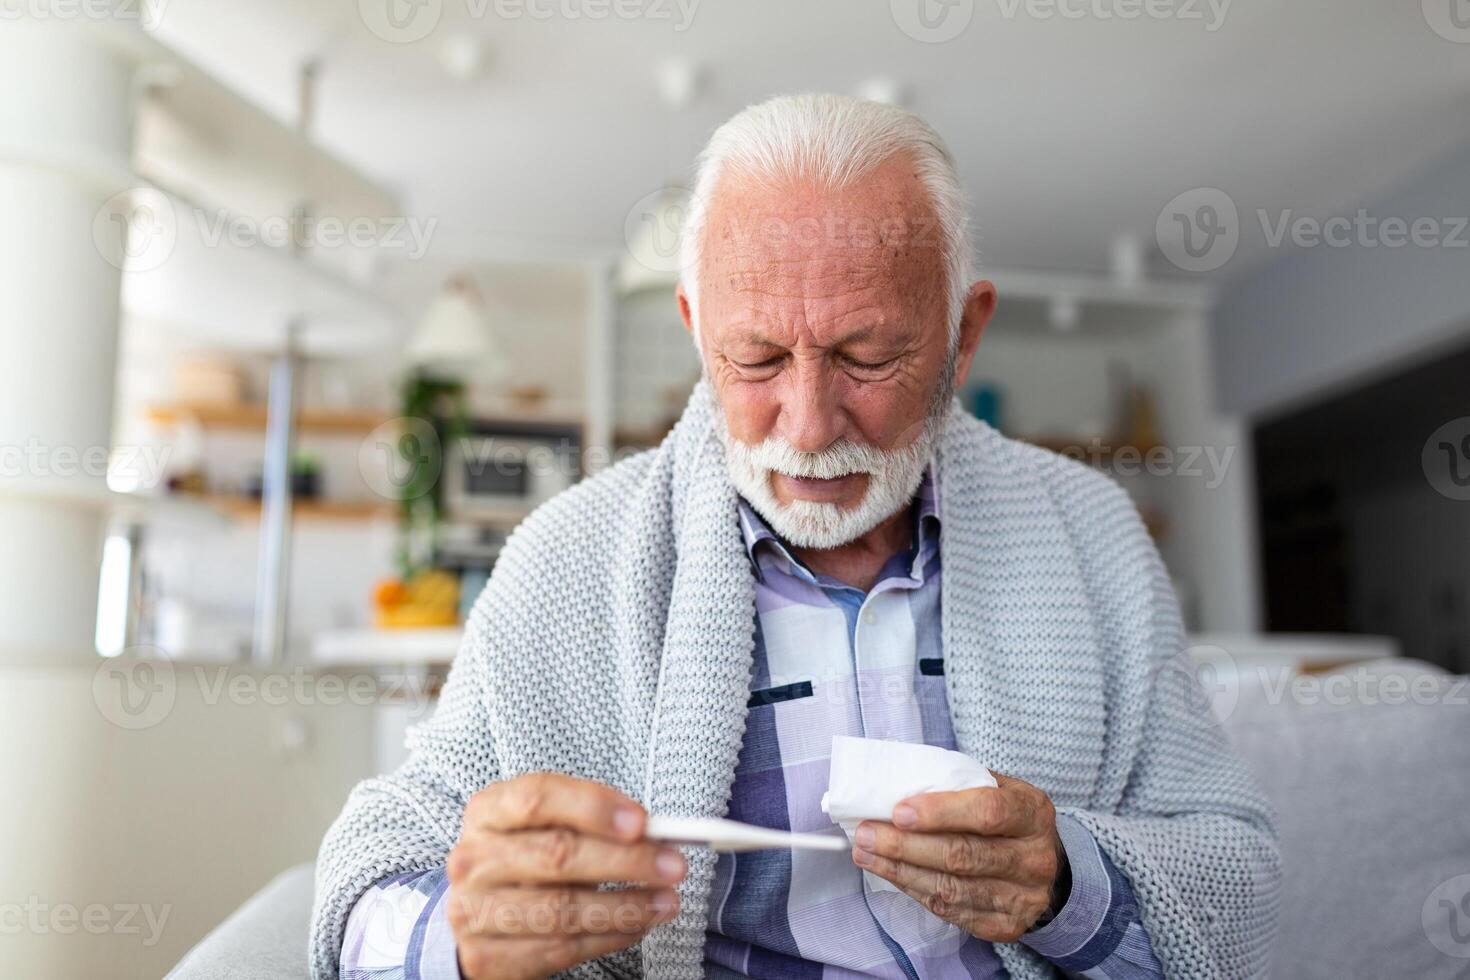 New coronavirus CoVid-19 outbreak situation with pandemic epidemic warning - adult caucasian senior old man with fever symptoms like illness cold seasonal influenza - people and virus concept photo